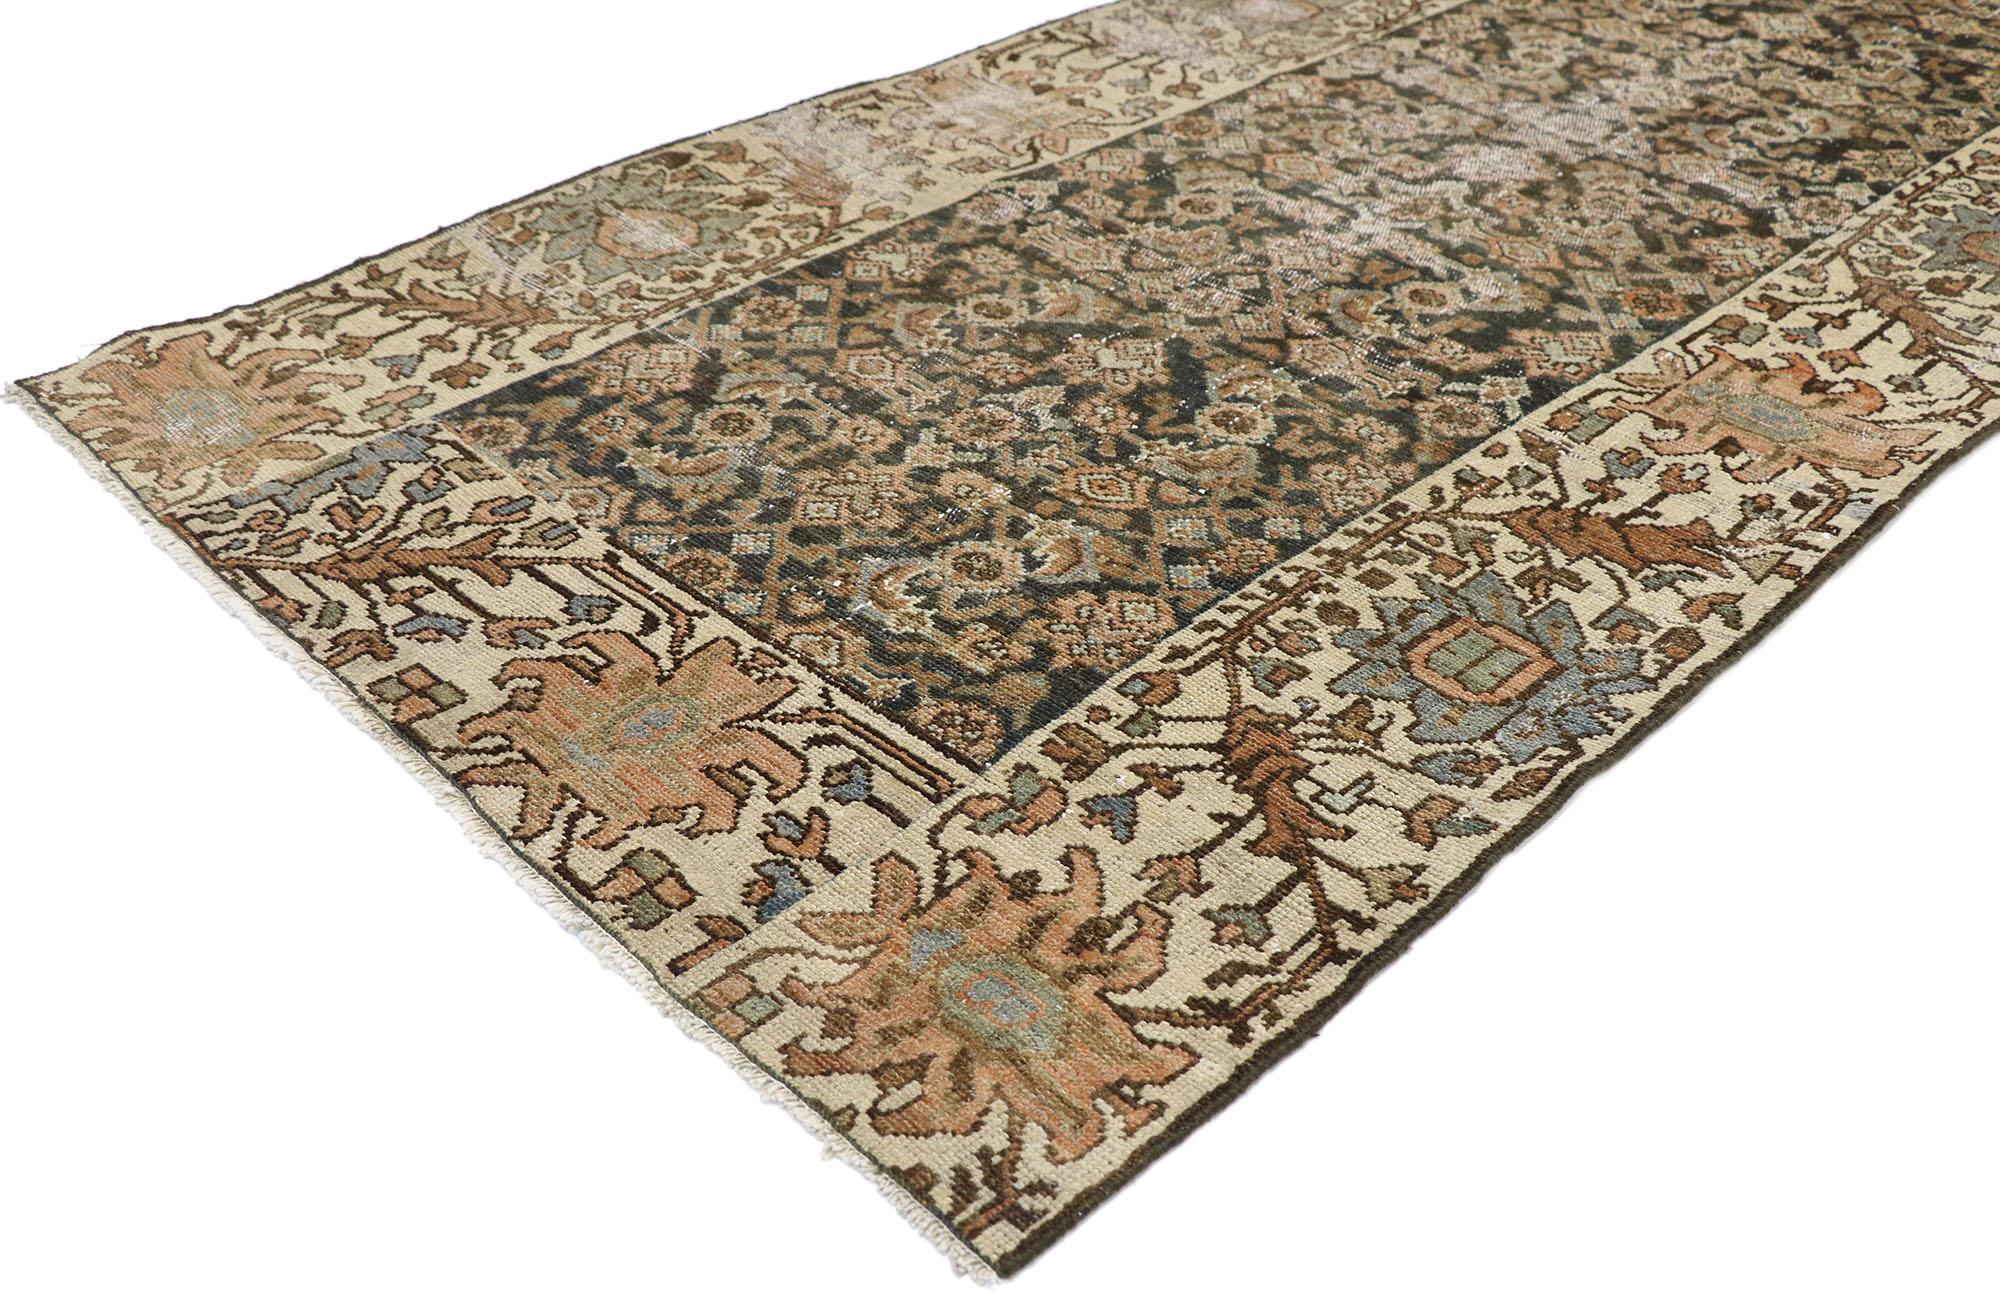 60826 Distressed antique Persian Malayer runner with Modern Rustic Shaker style. Warm and inviting with a timeless design, this hand-knotted wool distressed antique Persian Malayer carpet runner features an all-over Herati pattern spread across the